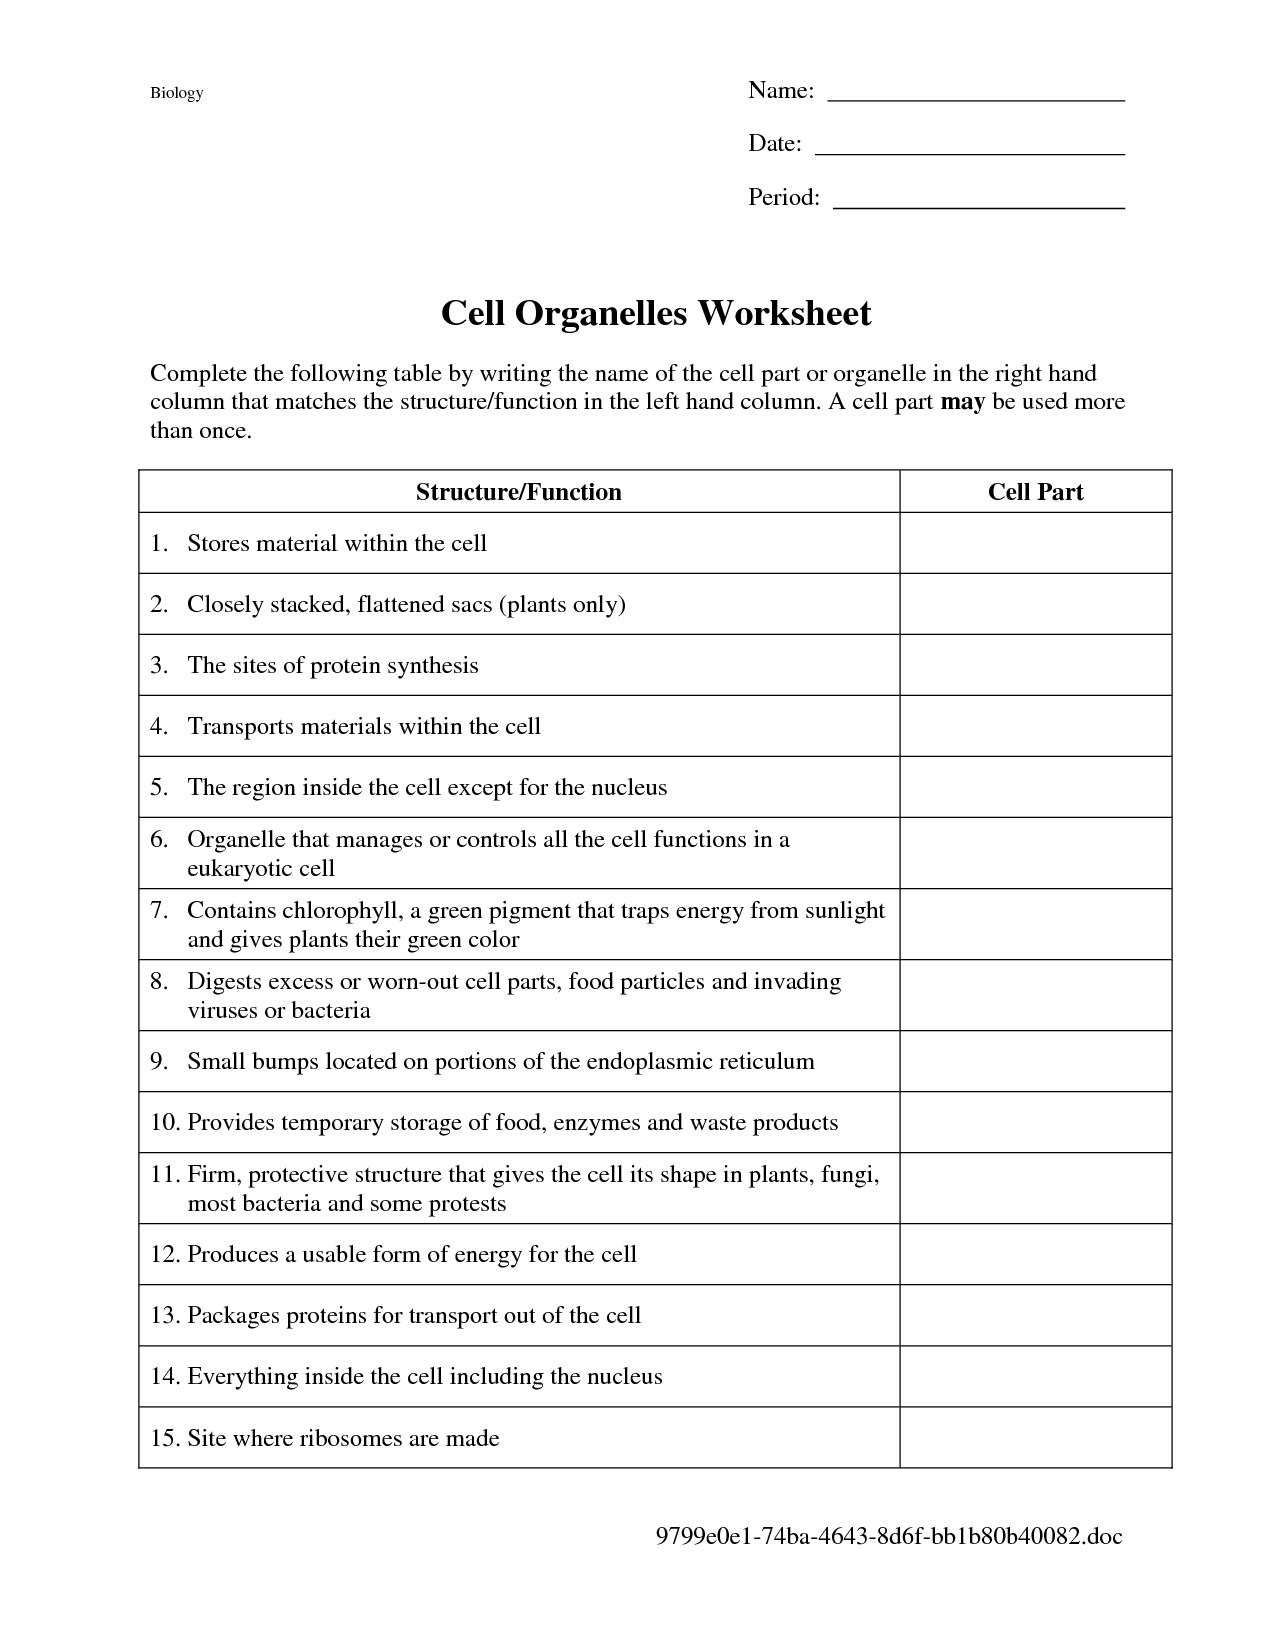 Functions Worksheet with Answers with Diagram Cell organelles originalstylophone